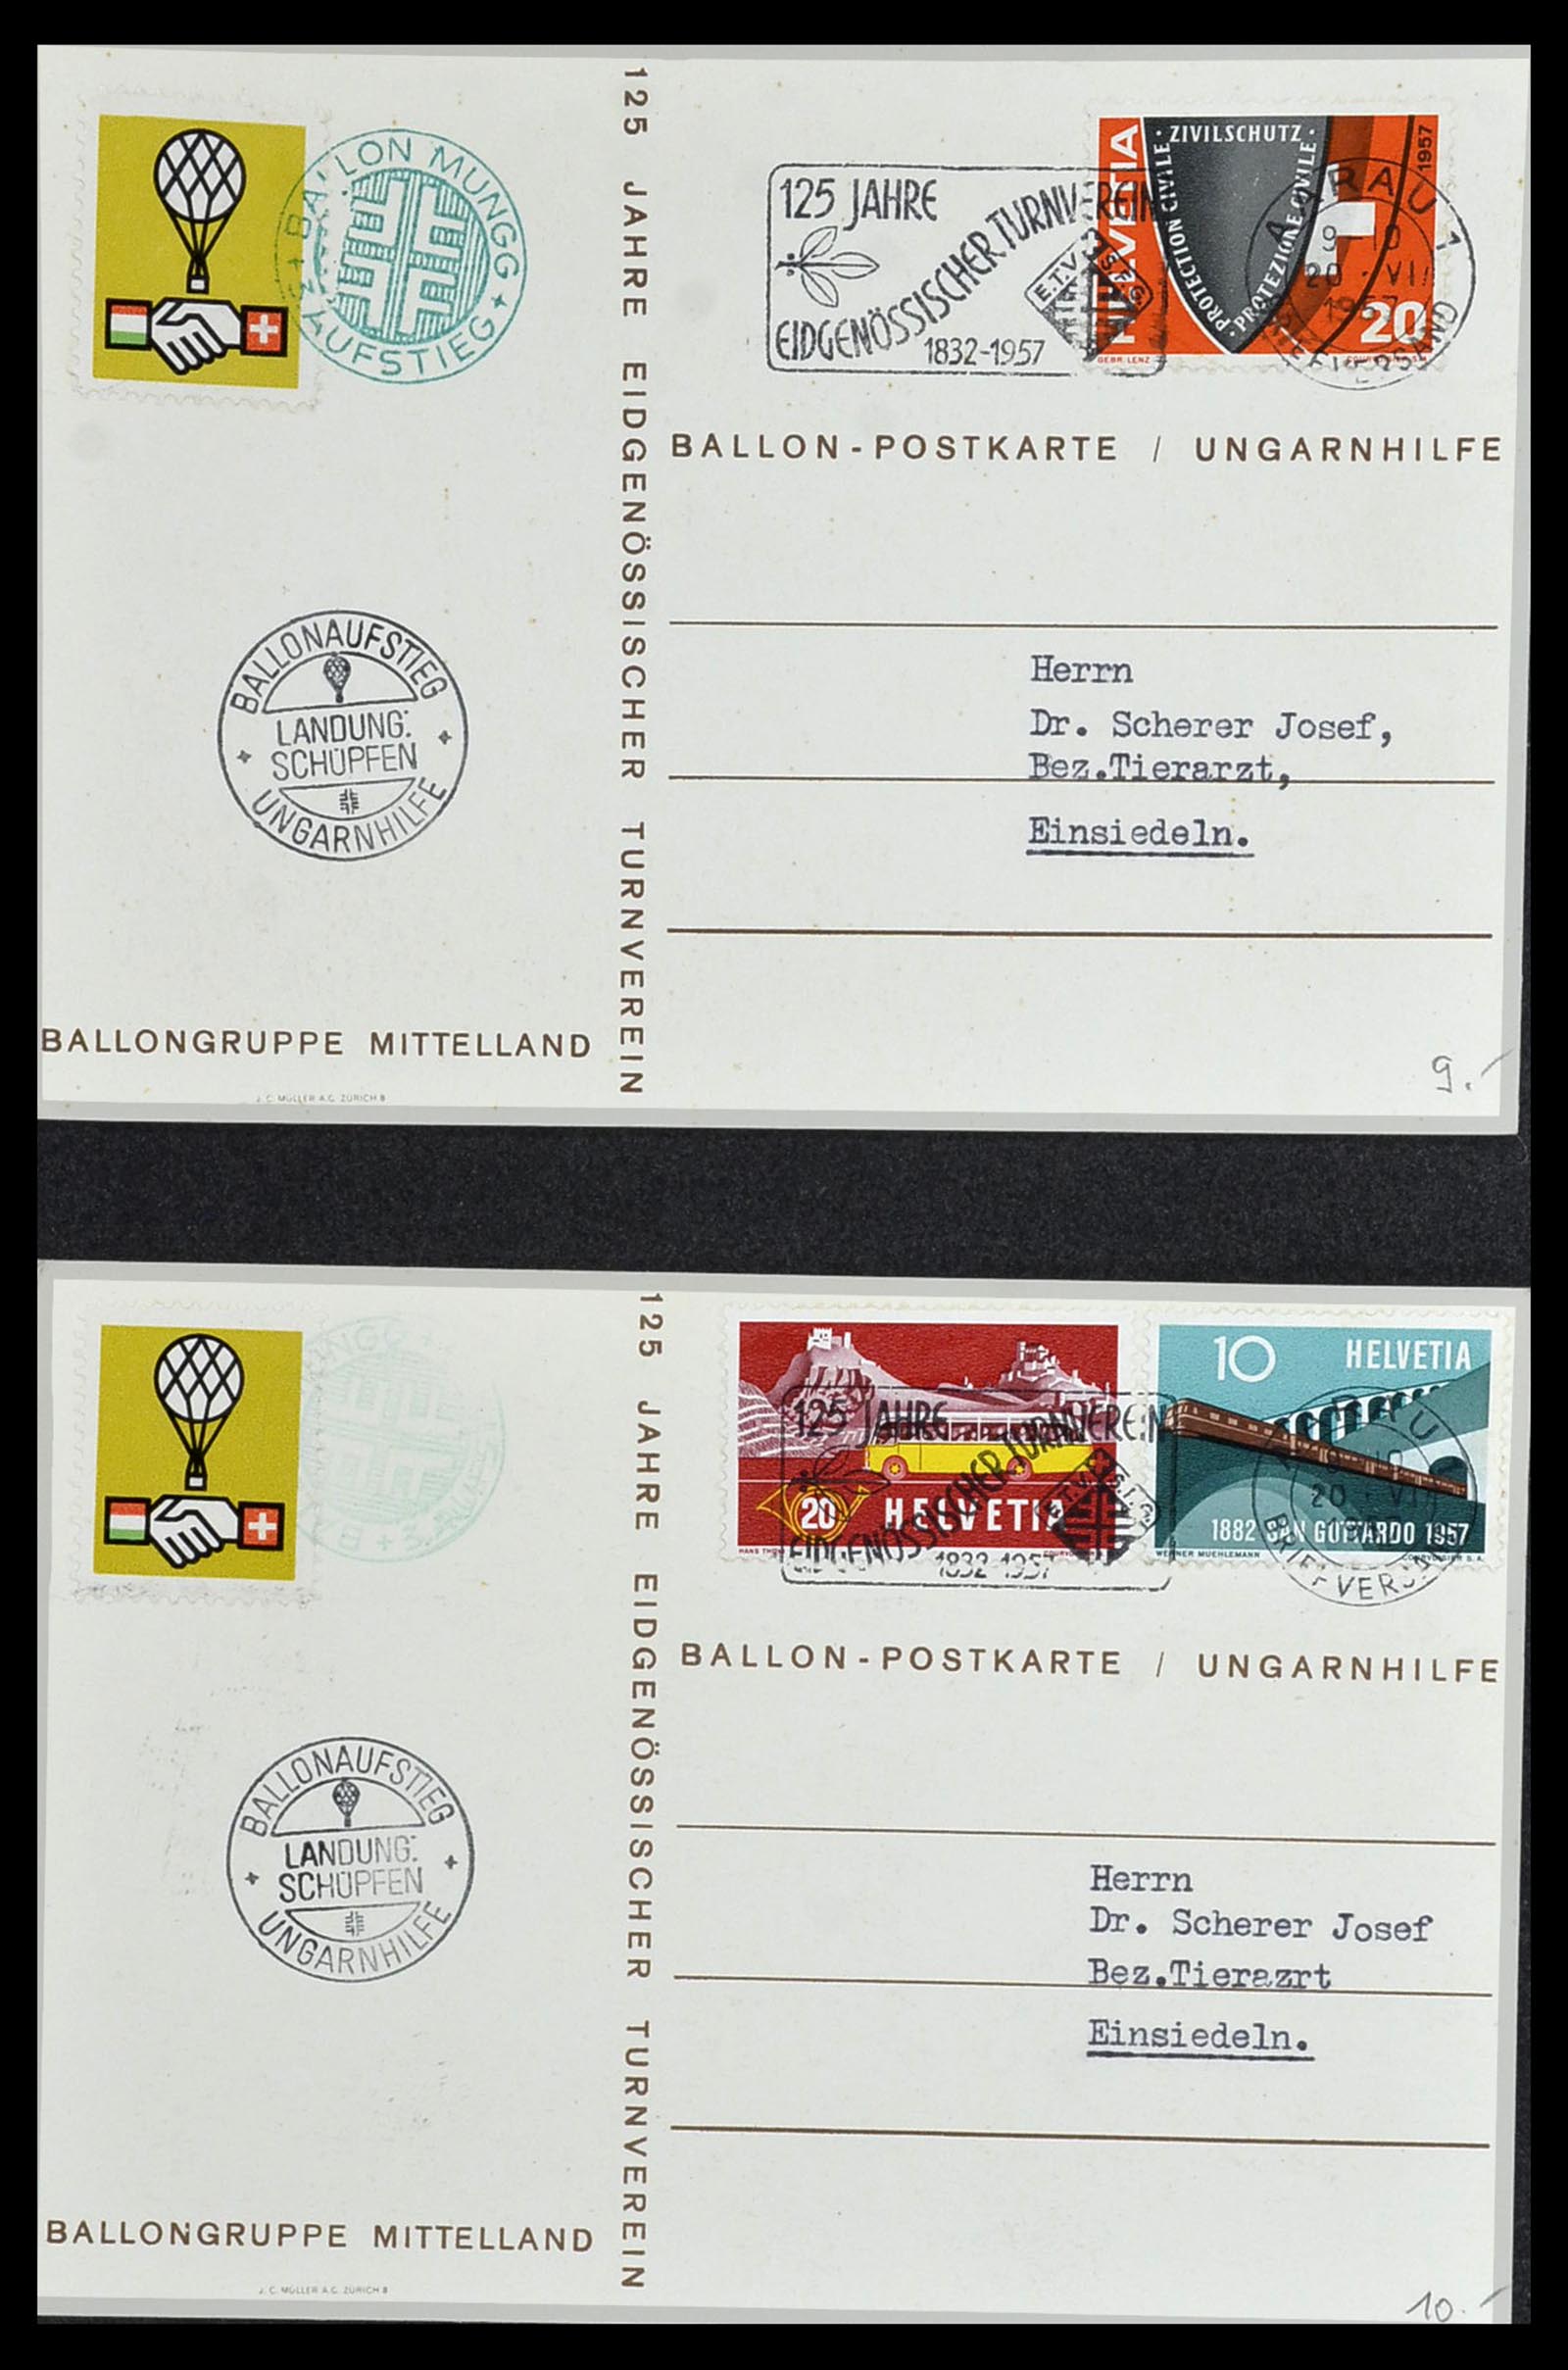 34141 058 - Stamp collection 34141 Switzerland airmail covers 1920-1960.